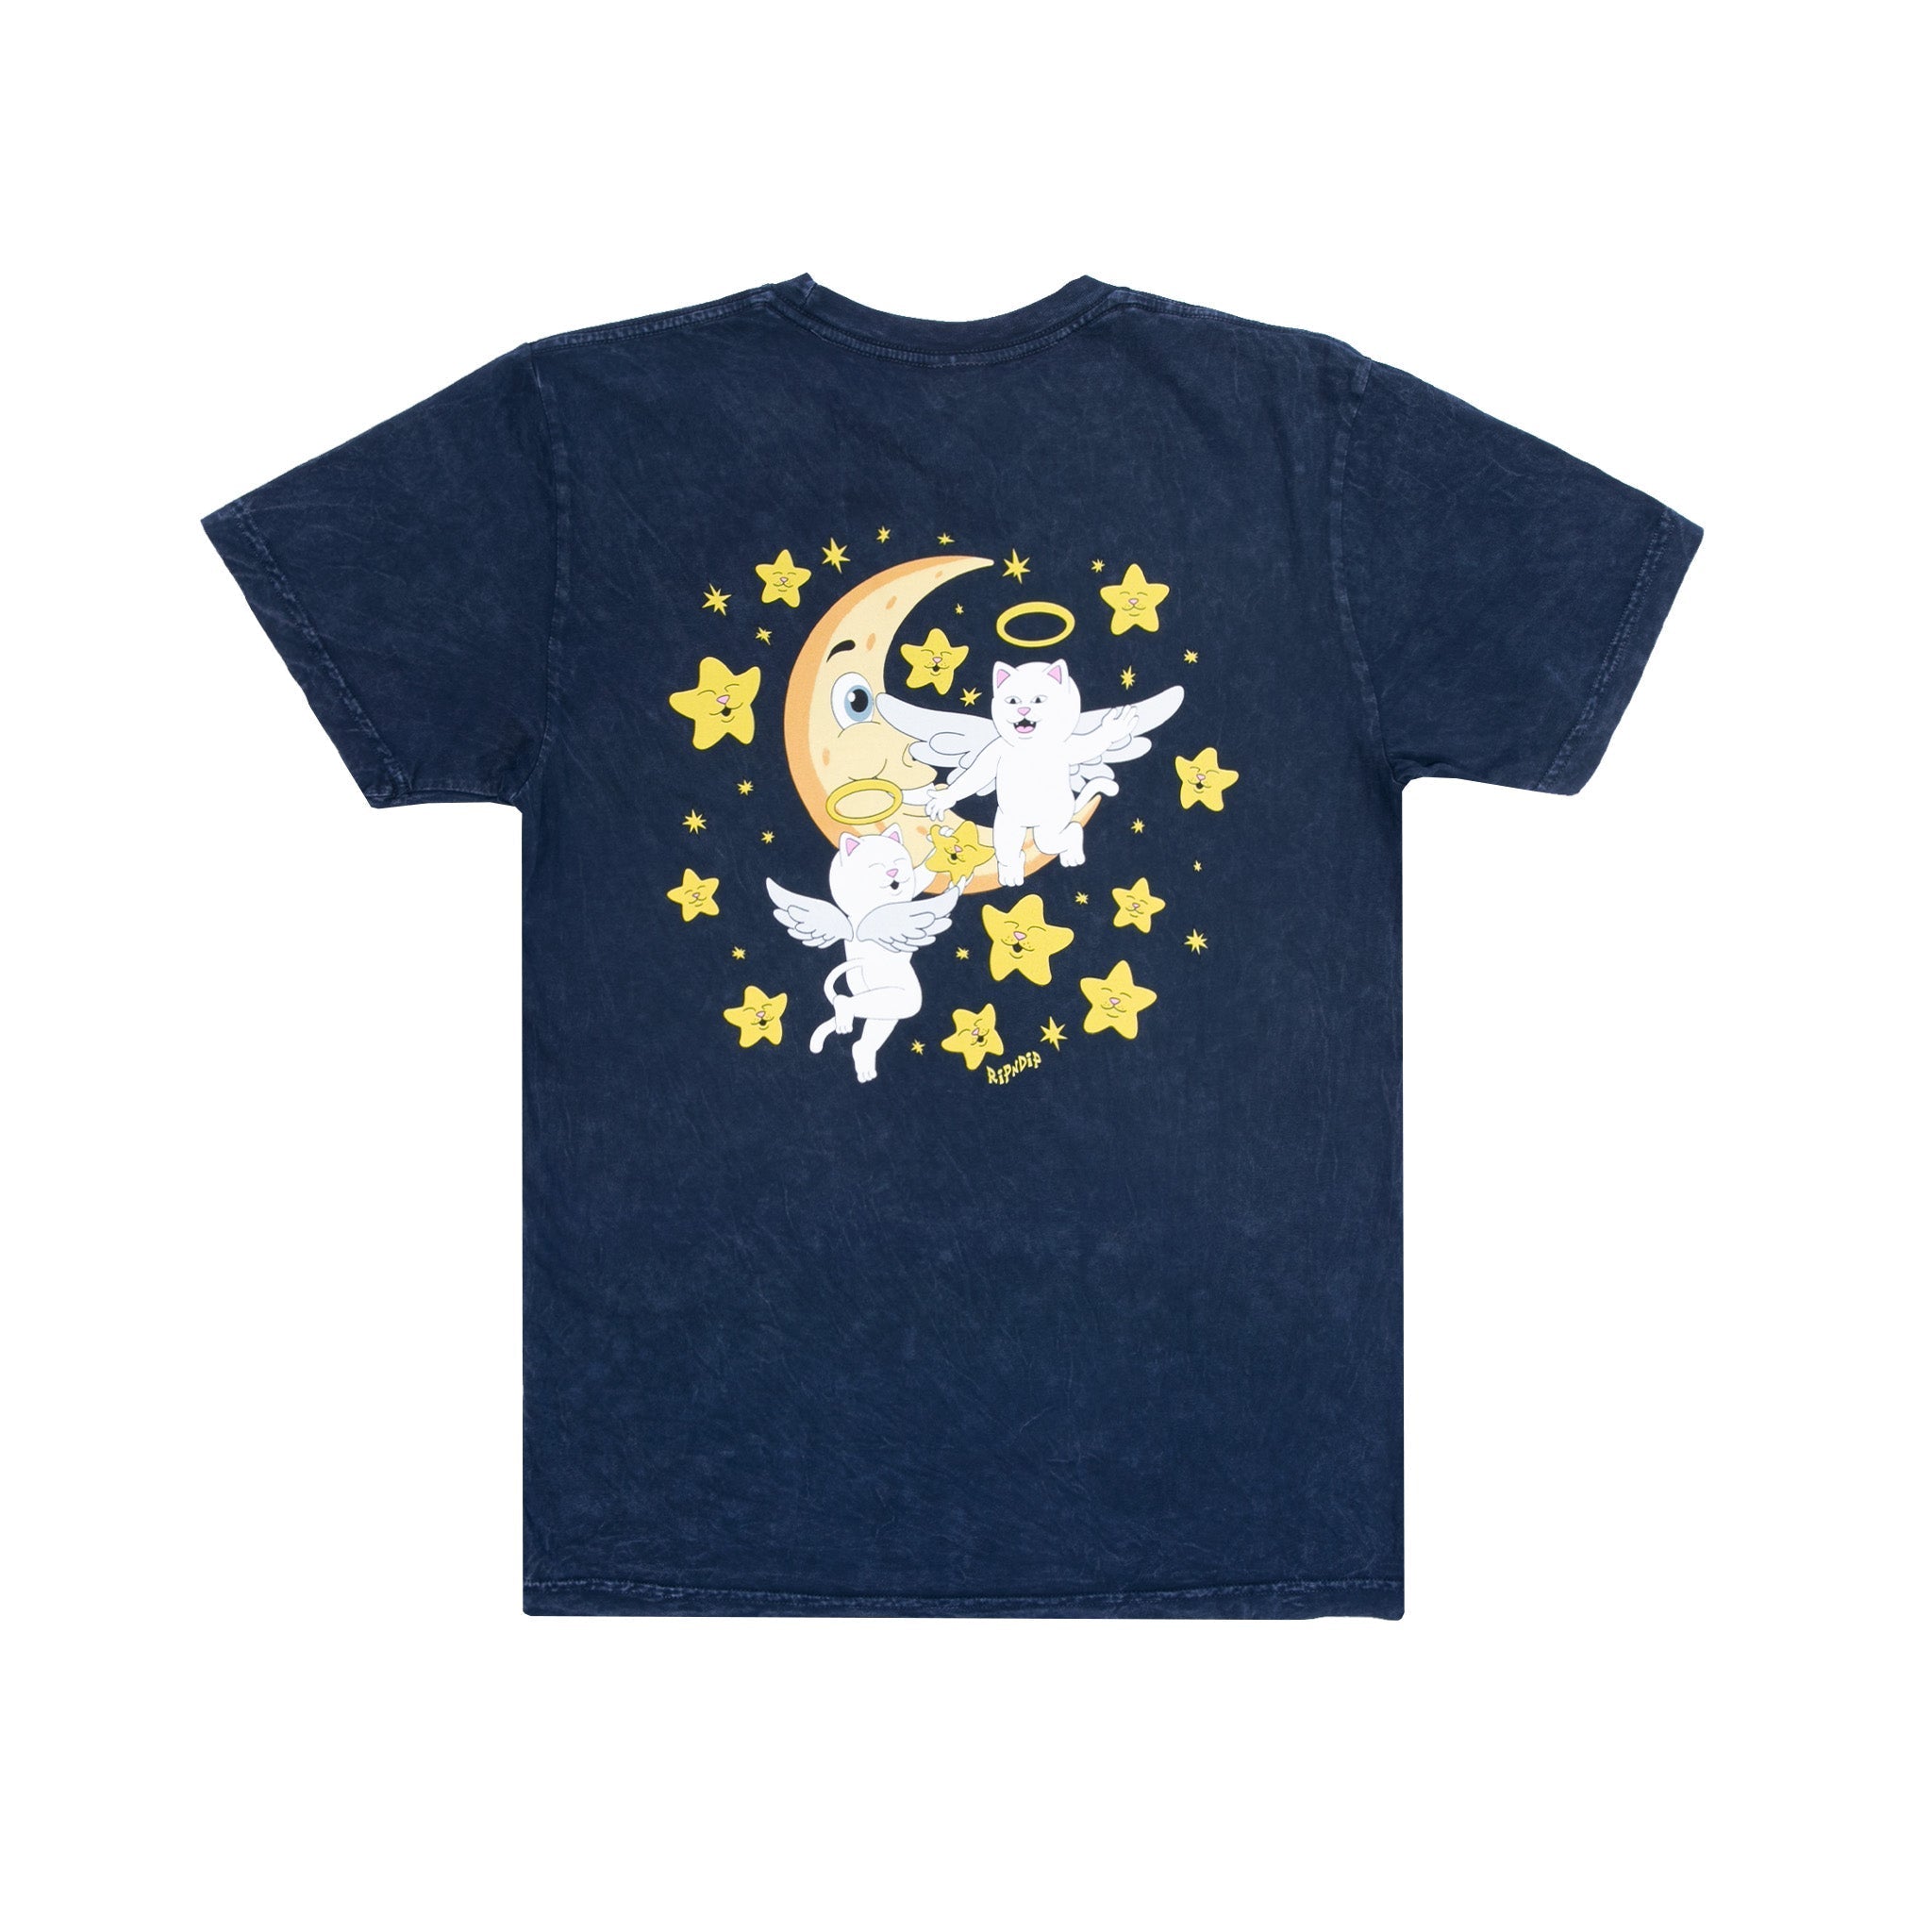 Lullaby Tee (Navy Mineral Wash)